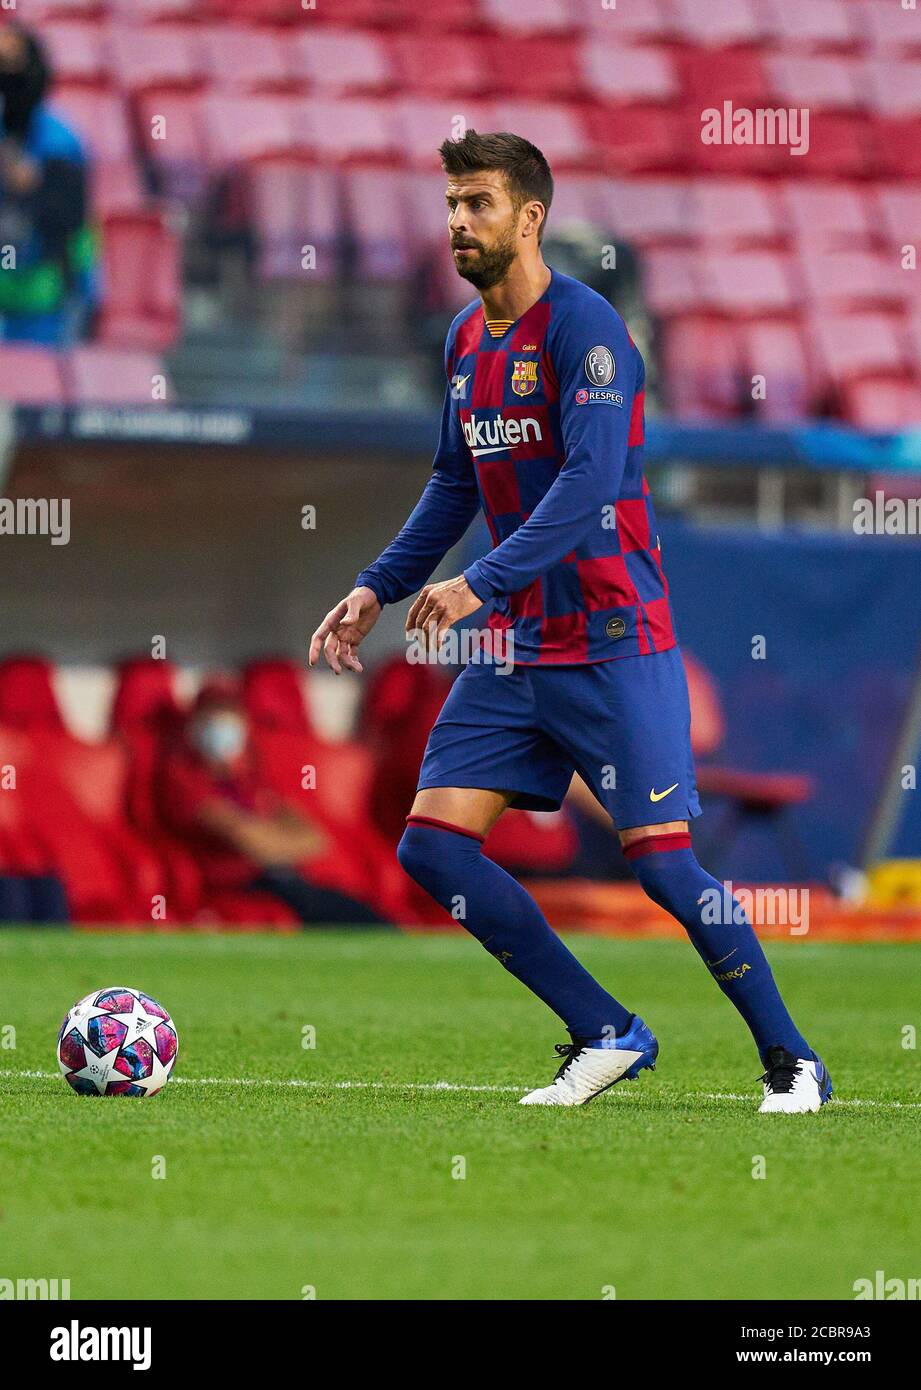 Lisbon, Lissabon, Portugal, 14th August 2020.  Gerard PIQUE, Barca 3  in the quarterfinal UEFA Champions League match final tournament FC BAYERN MUENCHEN - FC BARCELONA 8-2 in Season 2019/2020, FCB, Munich, Barca © Peter Schatz / Alamy Live News / Pool   - UEFA REGULATIONS PROHIBIT ANY USE OF PHOTOGRAPHS as IMAGE SEQUENCES and/or QUASI-VIDEO -  National and international News-Agencies OUT Editorial Use ONLY Stock Photo